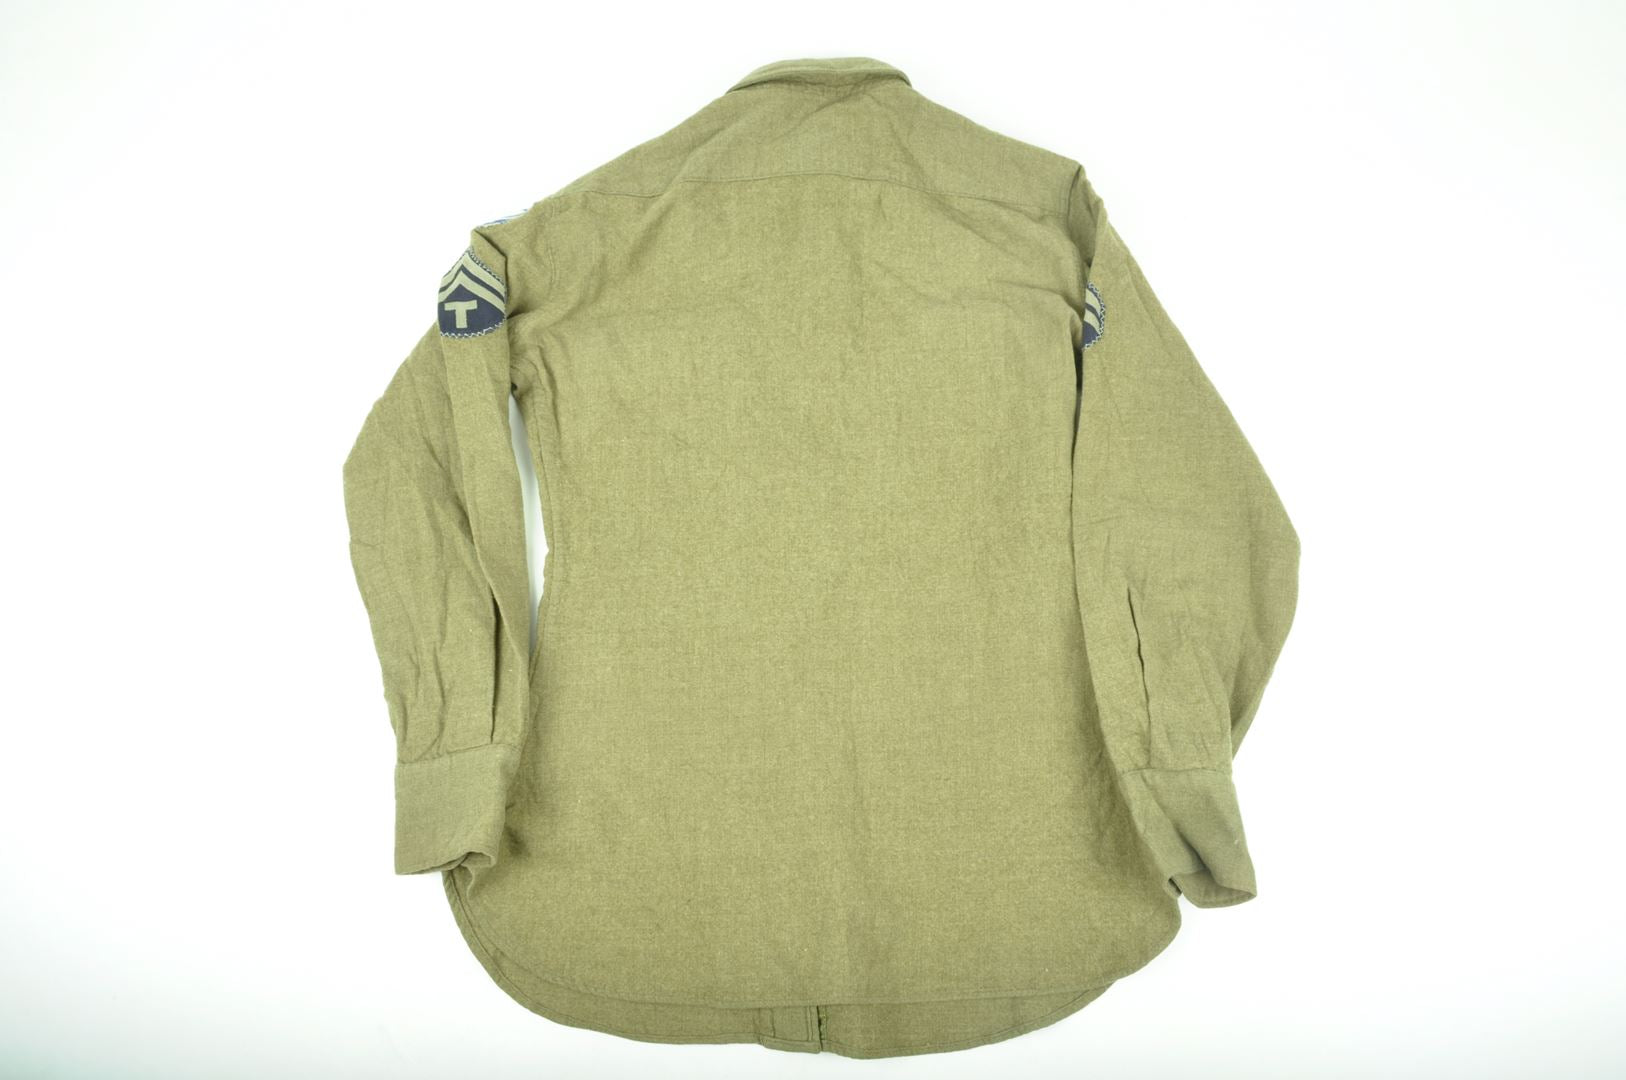 Chemise "moutarde" / XXIV Army Corps/ Pacifique